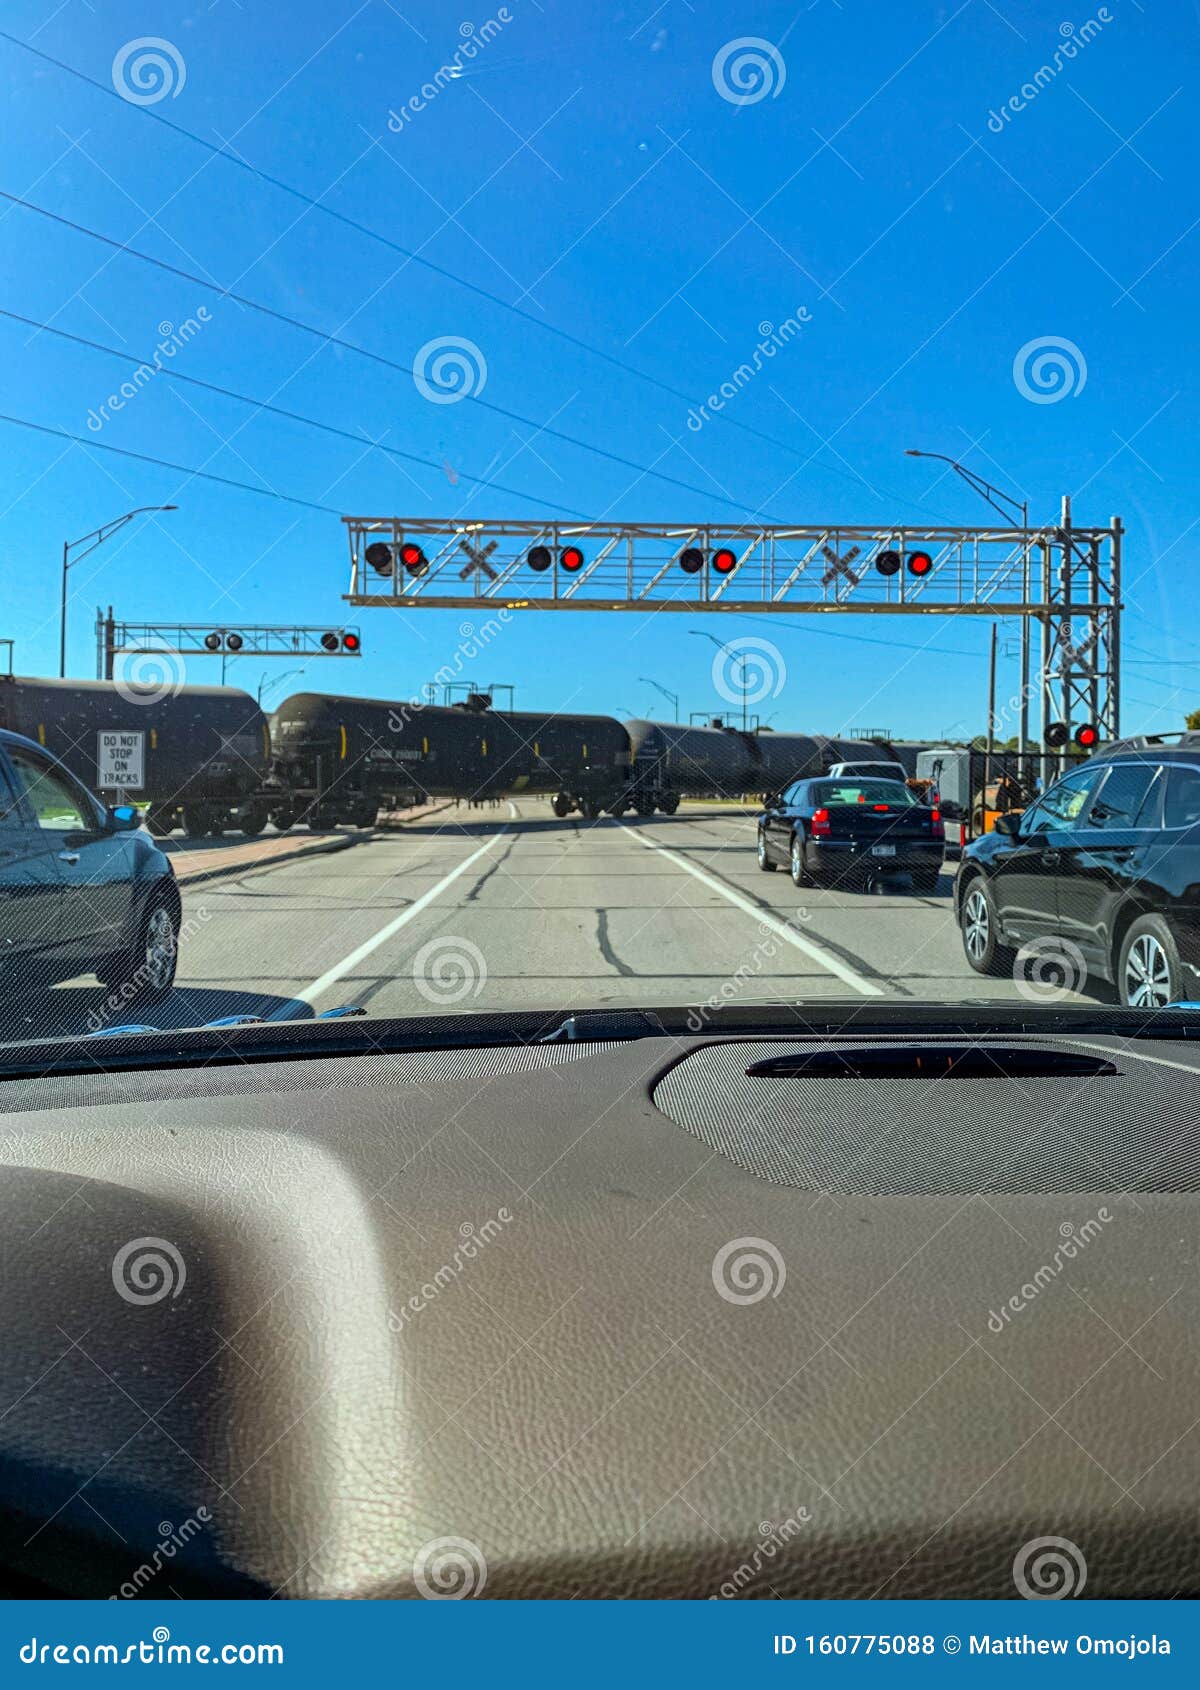 A Level Crossing Railway Or Railroad Crossing Grade Crossing Editorial Stock Photo Image Of Lights Pacific